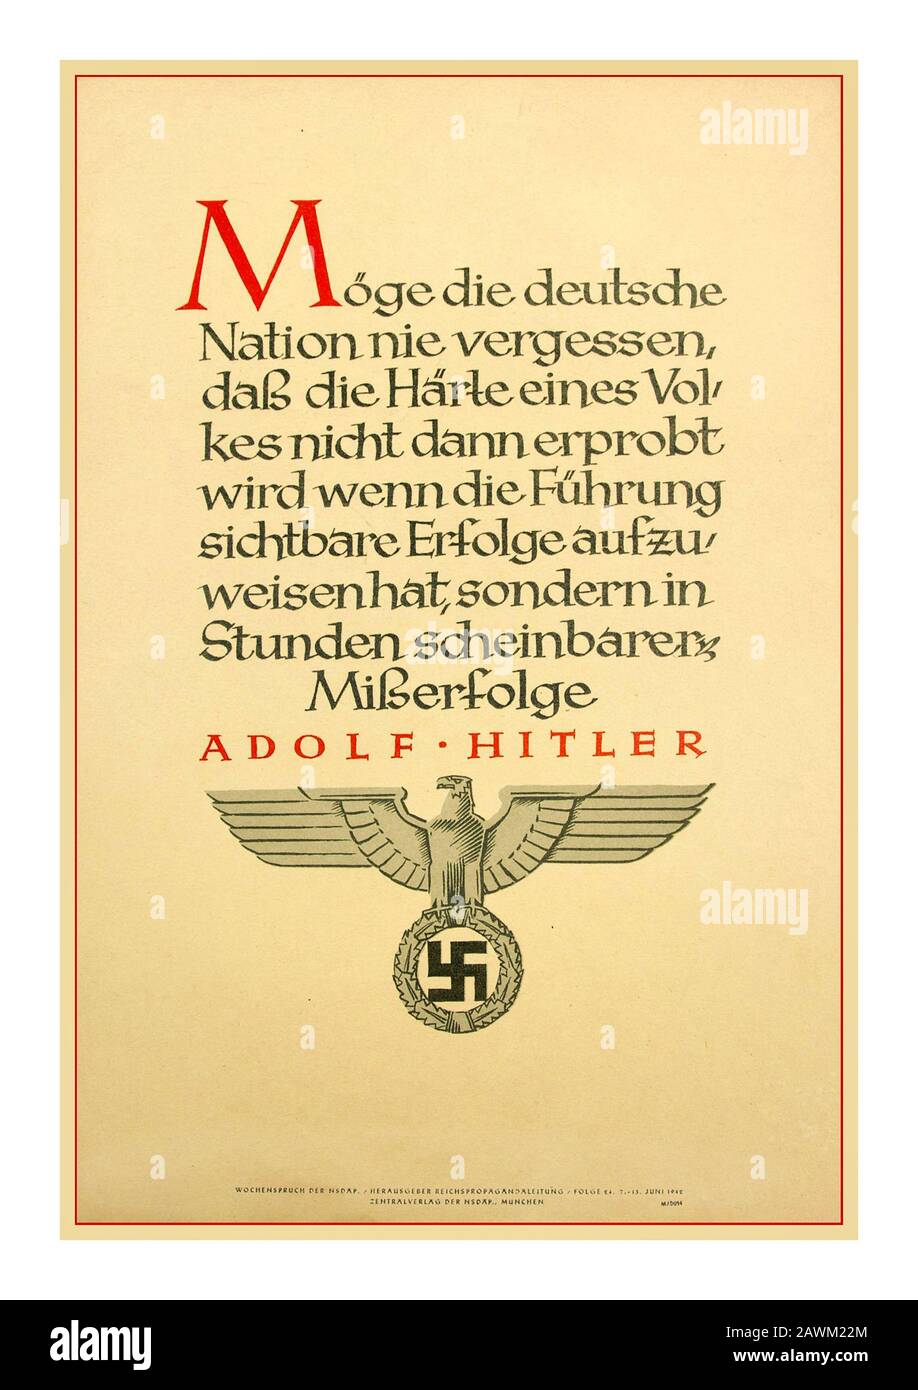 WW2 German Nazi Home Propaganda message from Adolf Hitler  NSDAP Wochenspruch (propaganda miniposter) –   7-13 June 1942.; These “Wochensprucher” were official NSDAP published propaganda posters that would be hung up in houses and in public buildings The text comes from a saying of Adolf Hitler  'May the German nation never forget that the hardness of a people will not be tested if the leadership shows visible success but in the hours of apparent failures' : Adolf Hitler... with official Nazi Swastika and Eagle crest at the bottom Second World War WW2 World War II Nazi Germany Stock Photo